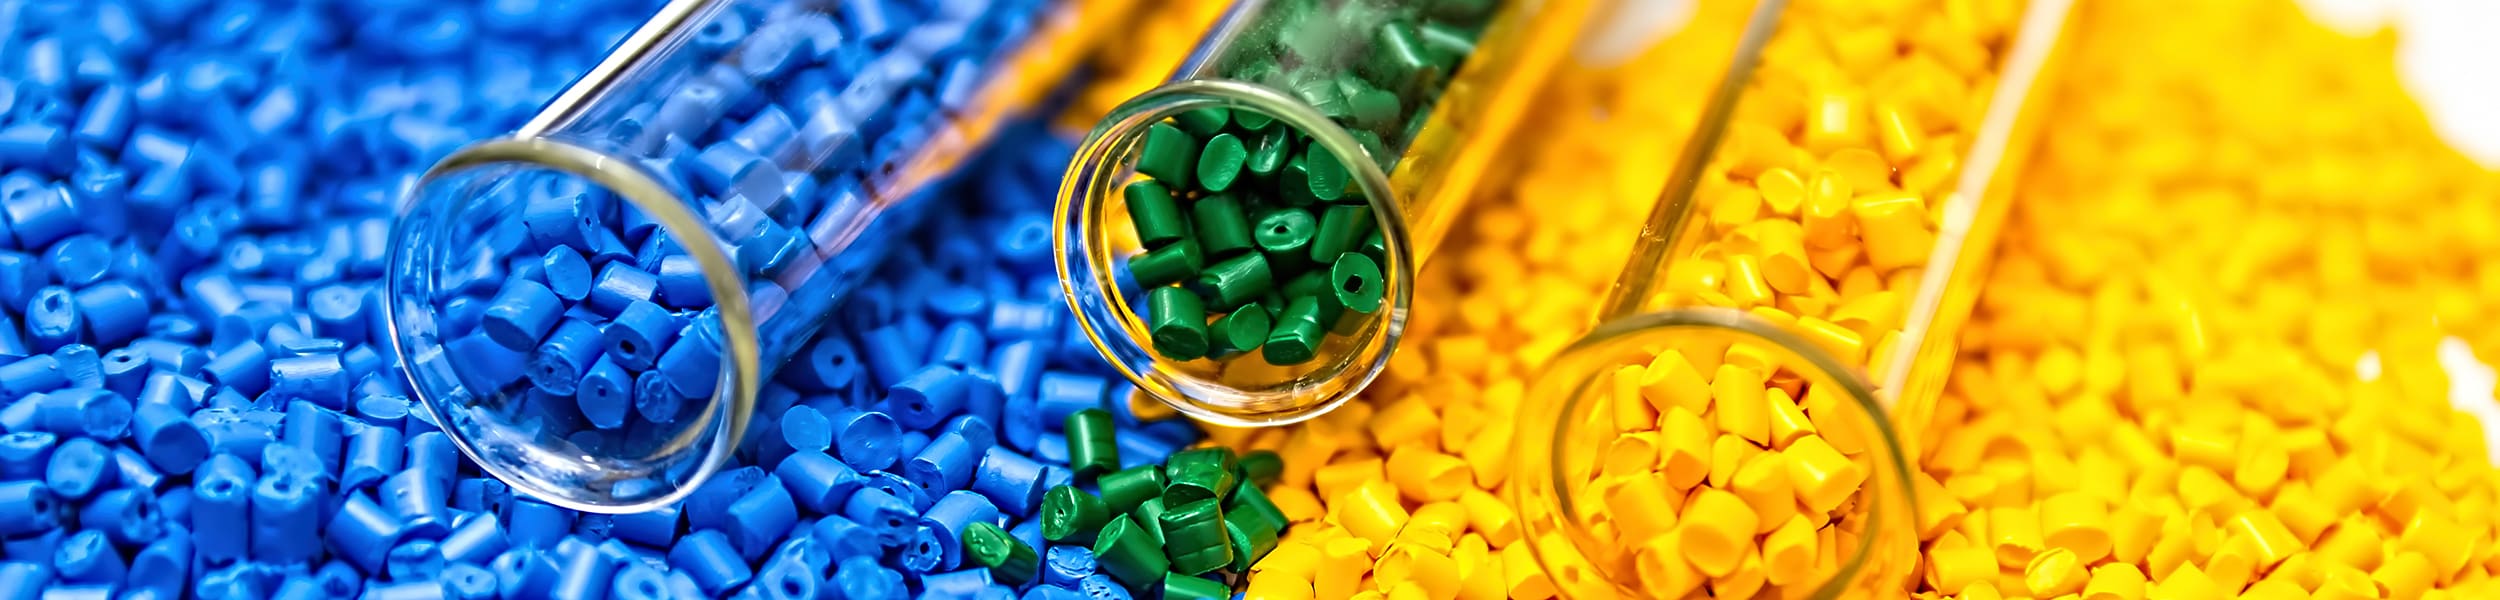 Aurora Material Solutions takes pride in our ability to custom compound nearly any specialty additive or filler that our customers would need including specific colors.